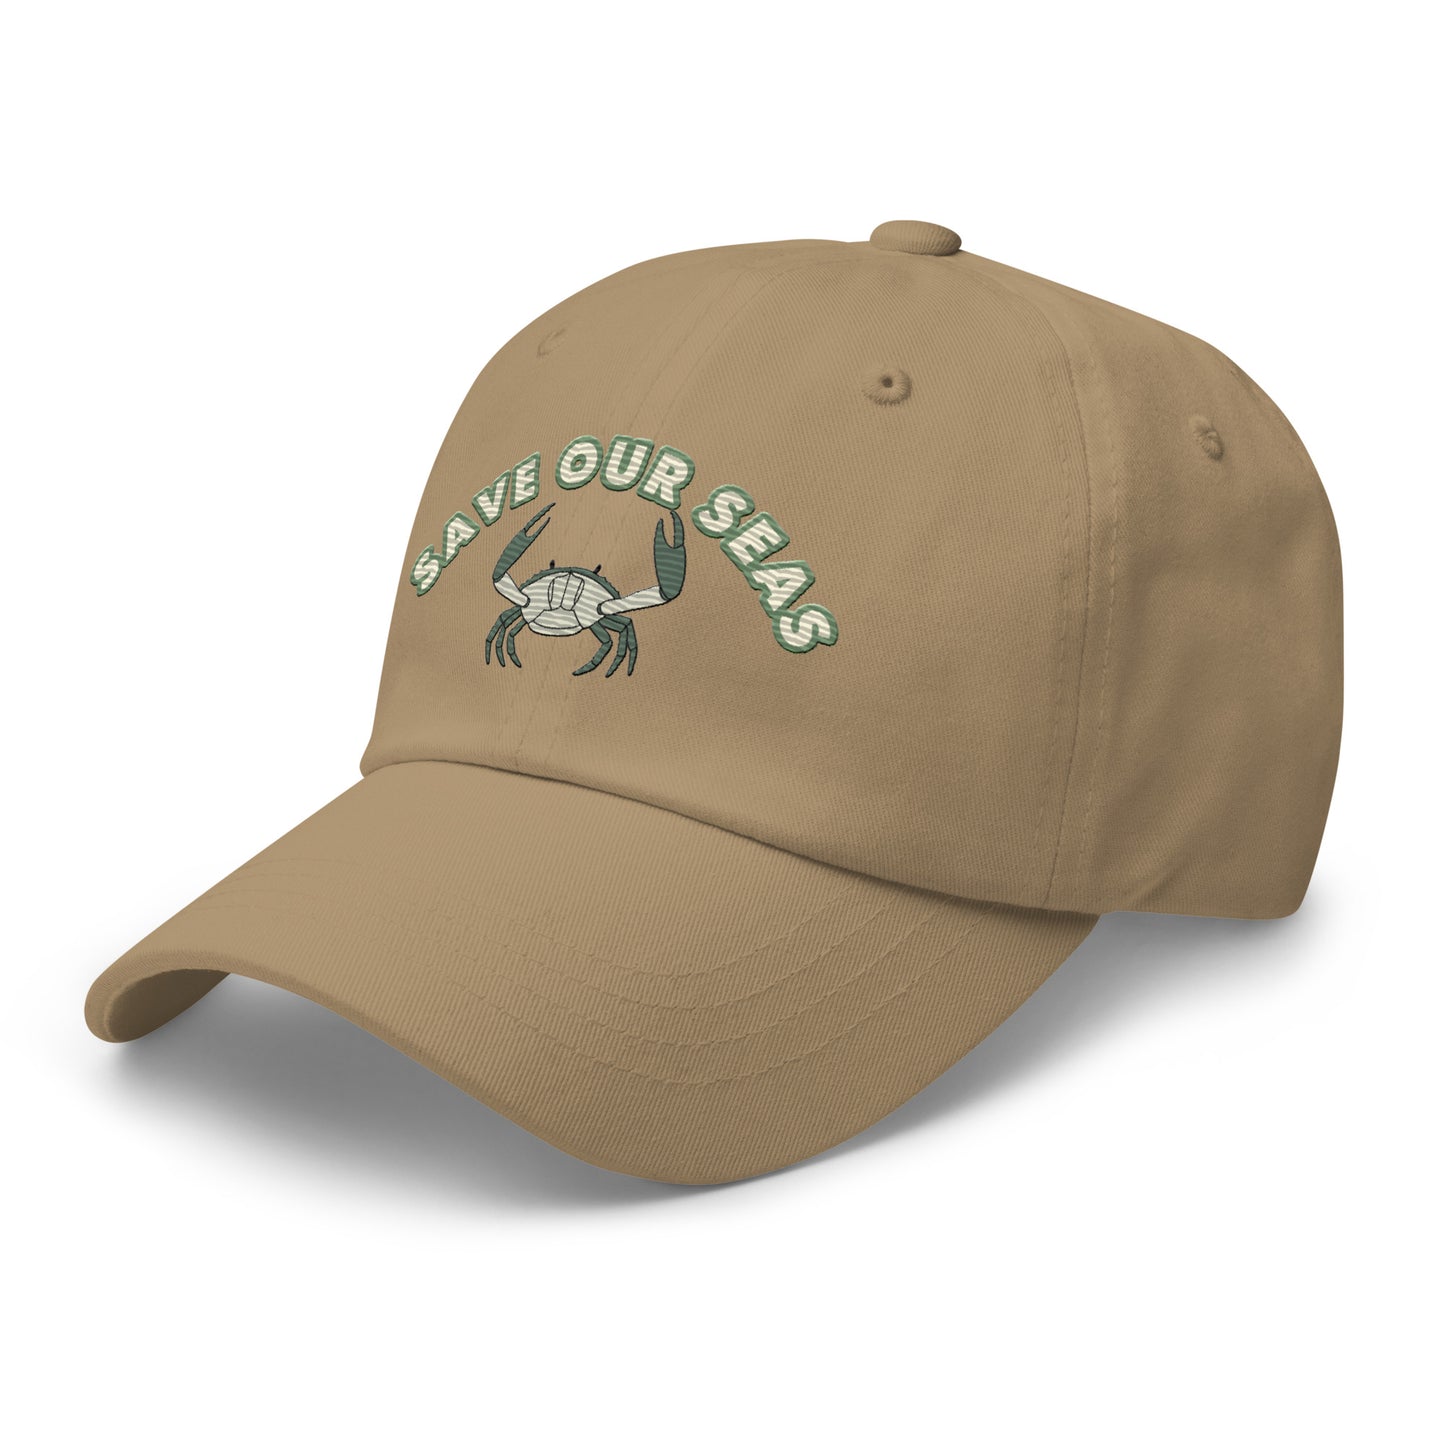 Save Our Seas Crab Dad hat: Pulls 4 pounds of ocean plastic!